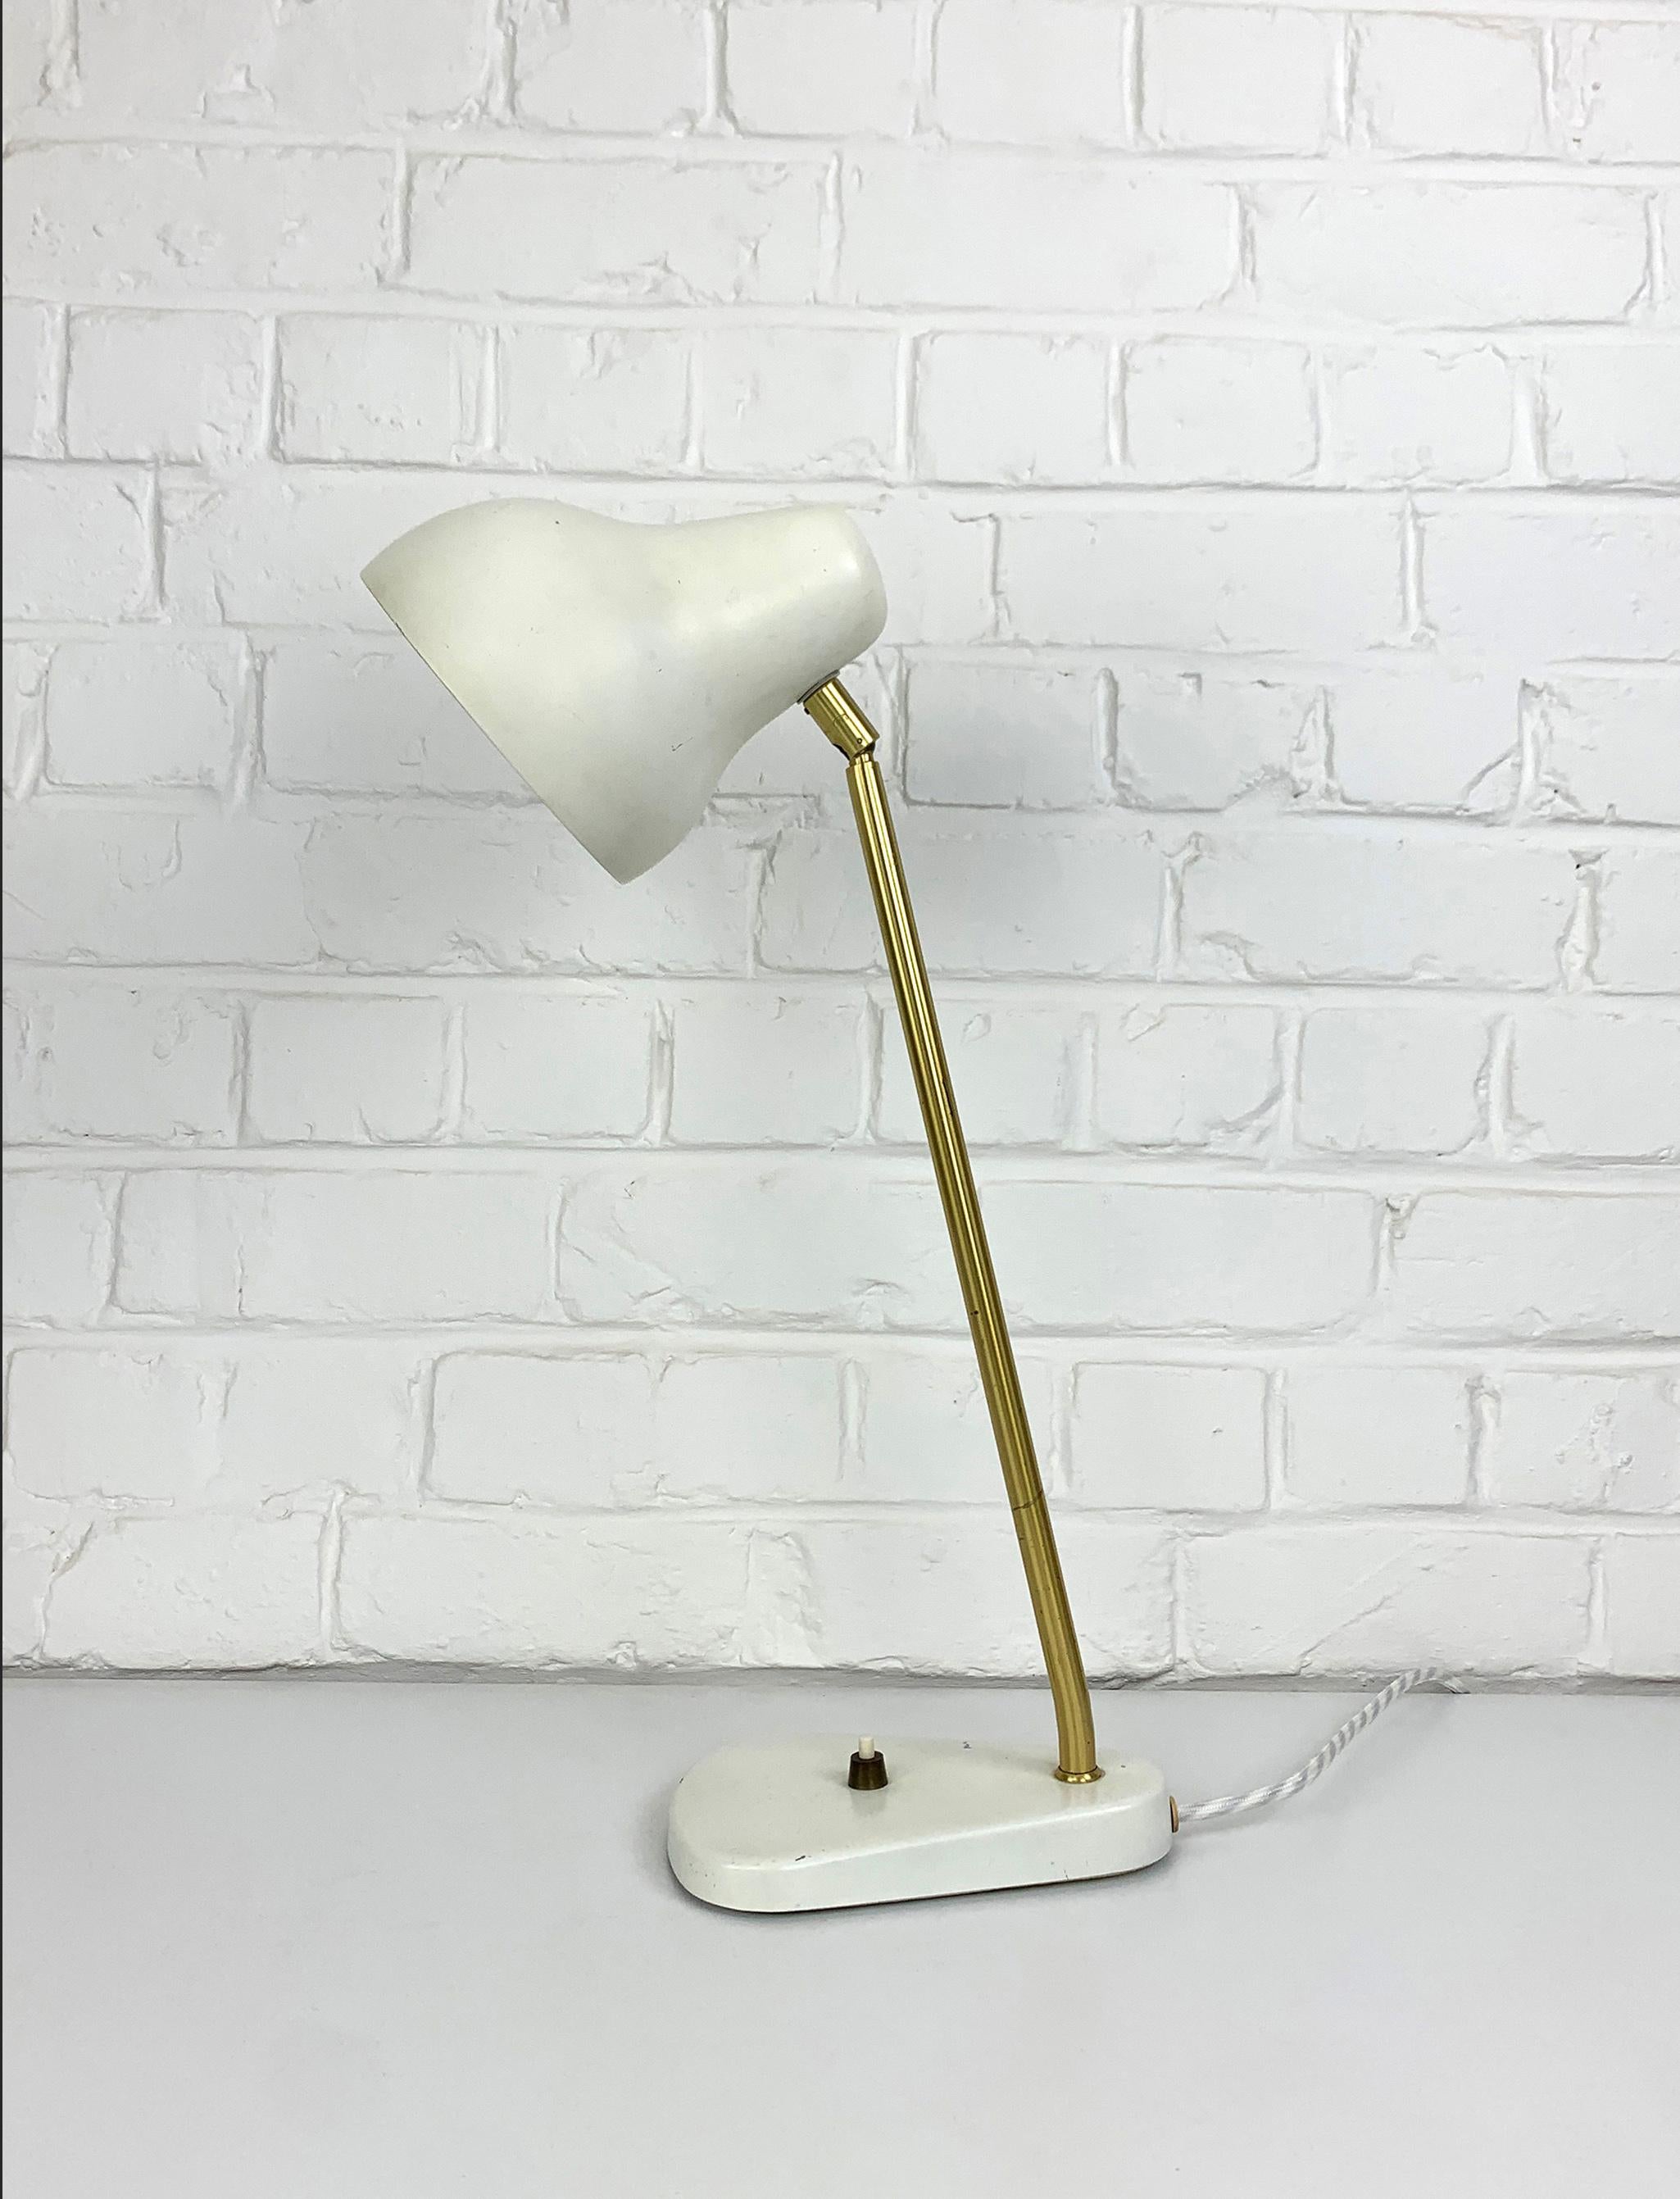 Vintage VL38 table lamp from the 1950ies, mat egg-shell paint, original finish. 

Shade made of aluminium, base made of iron, both painted off-white. Tube and ball-joint articulation made of brass. 

Organically formed lampshade which is